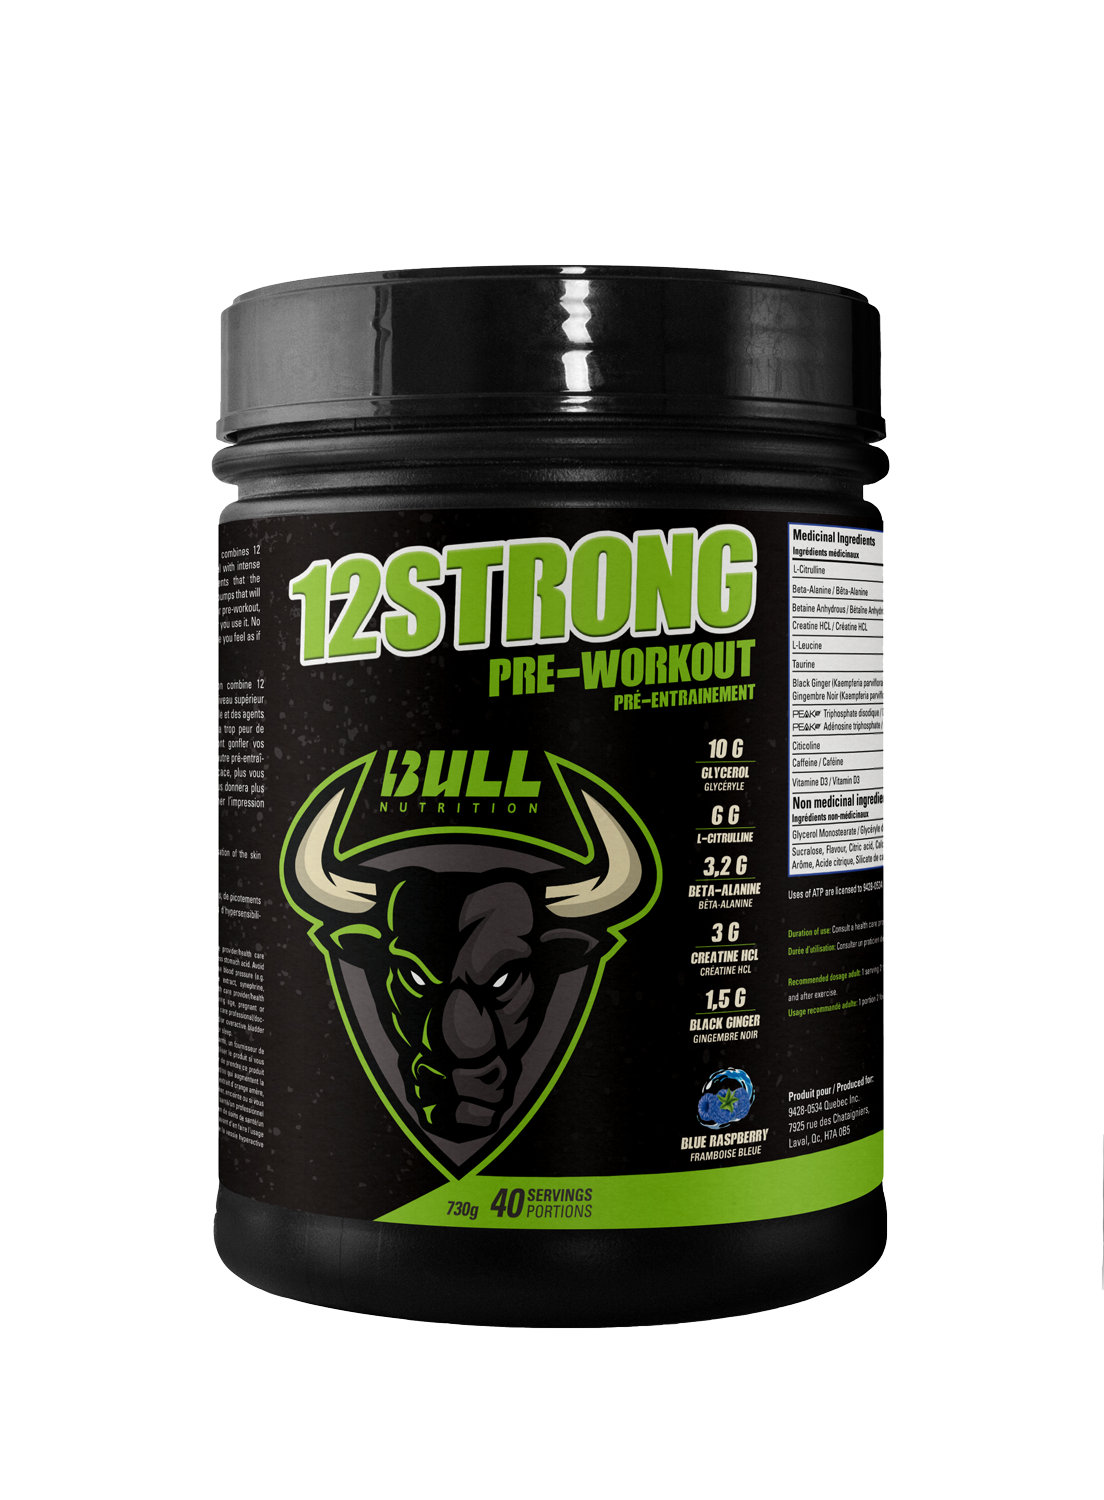 Bull Nutrition 12 Strong